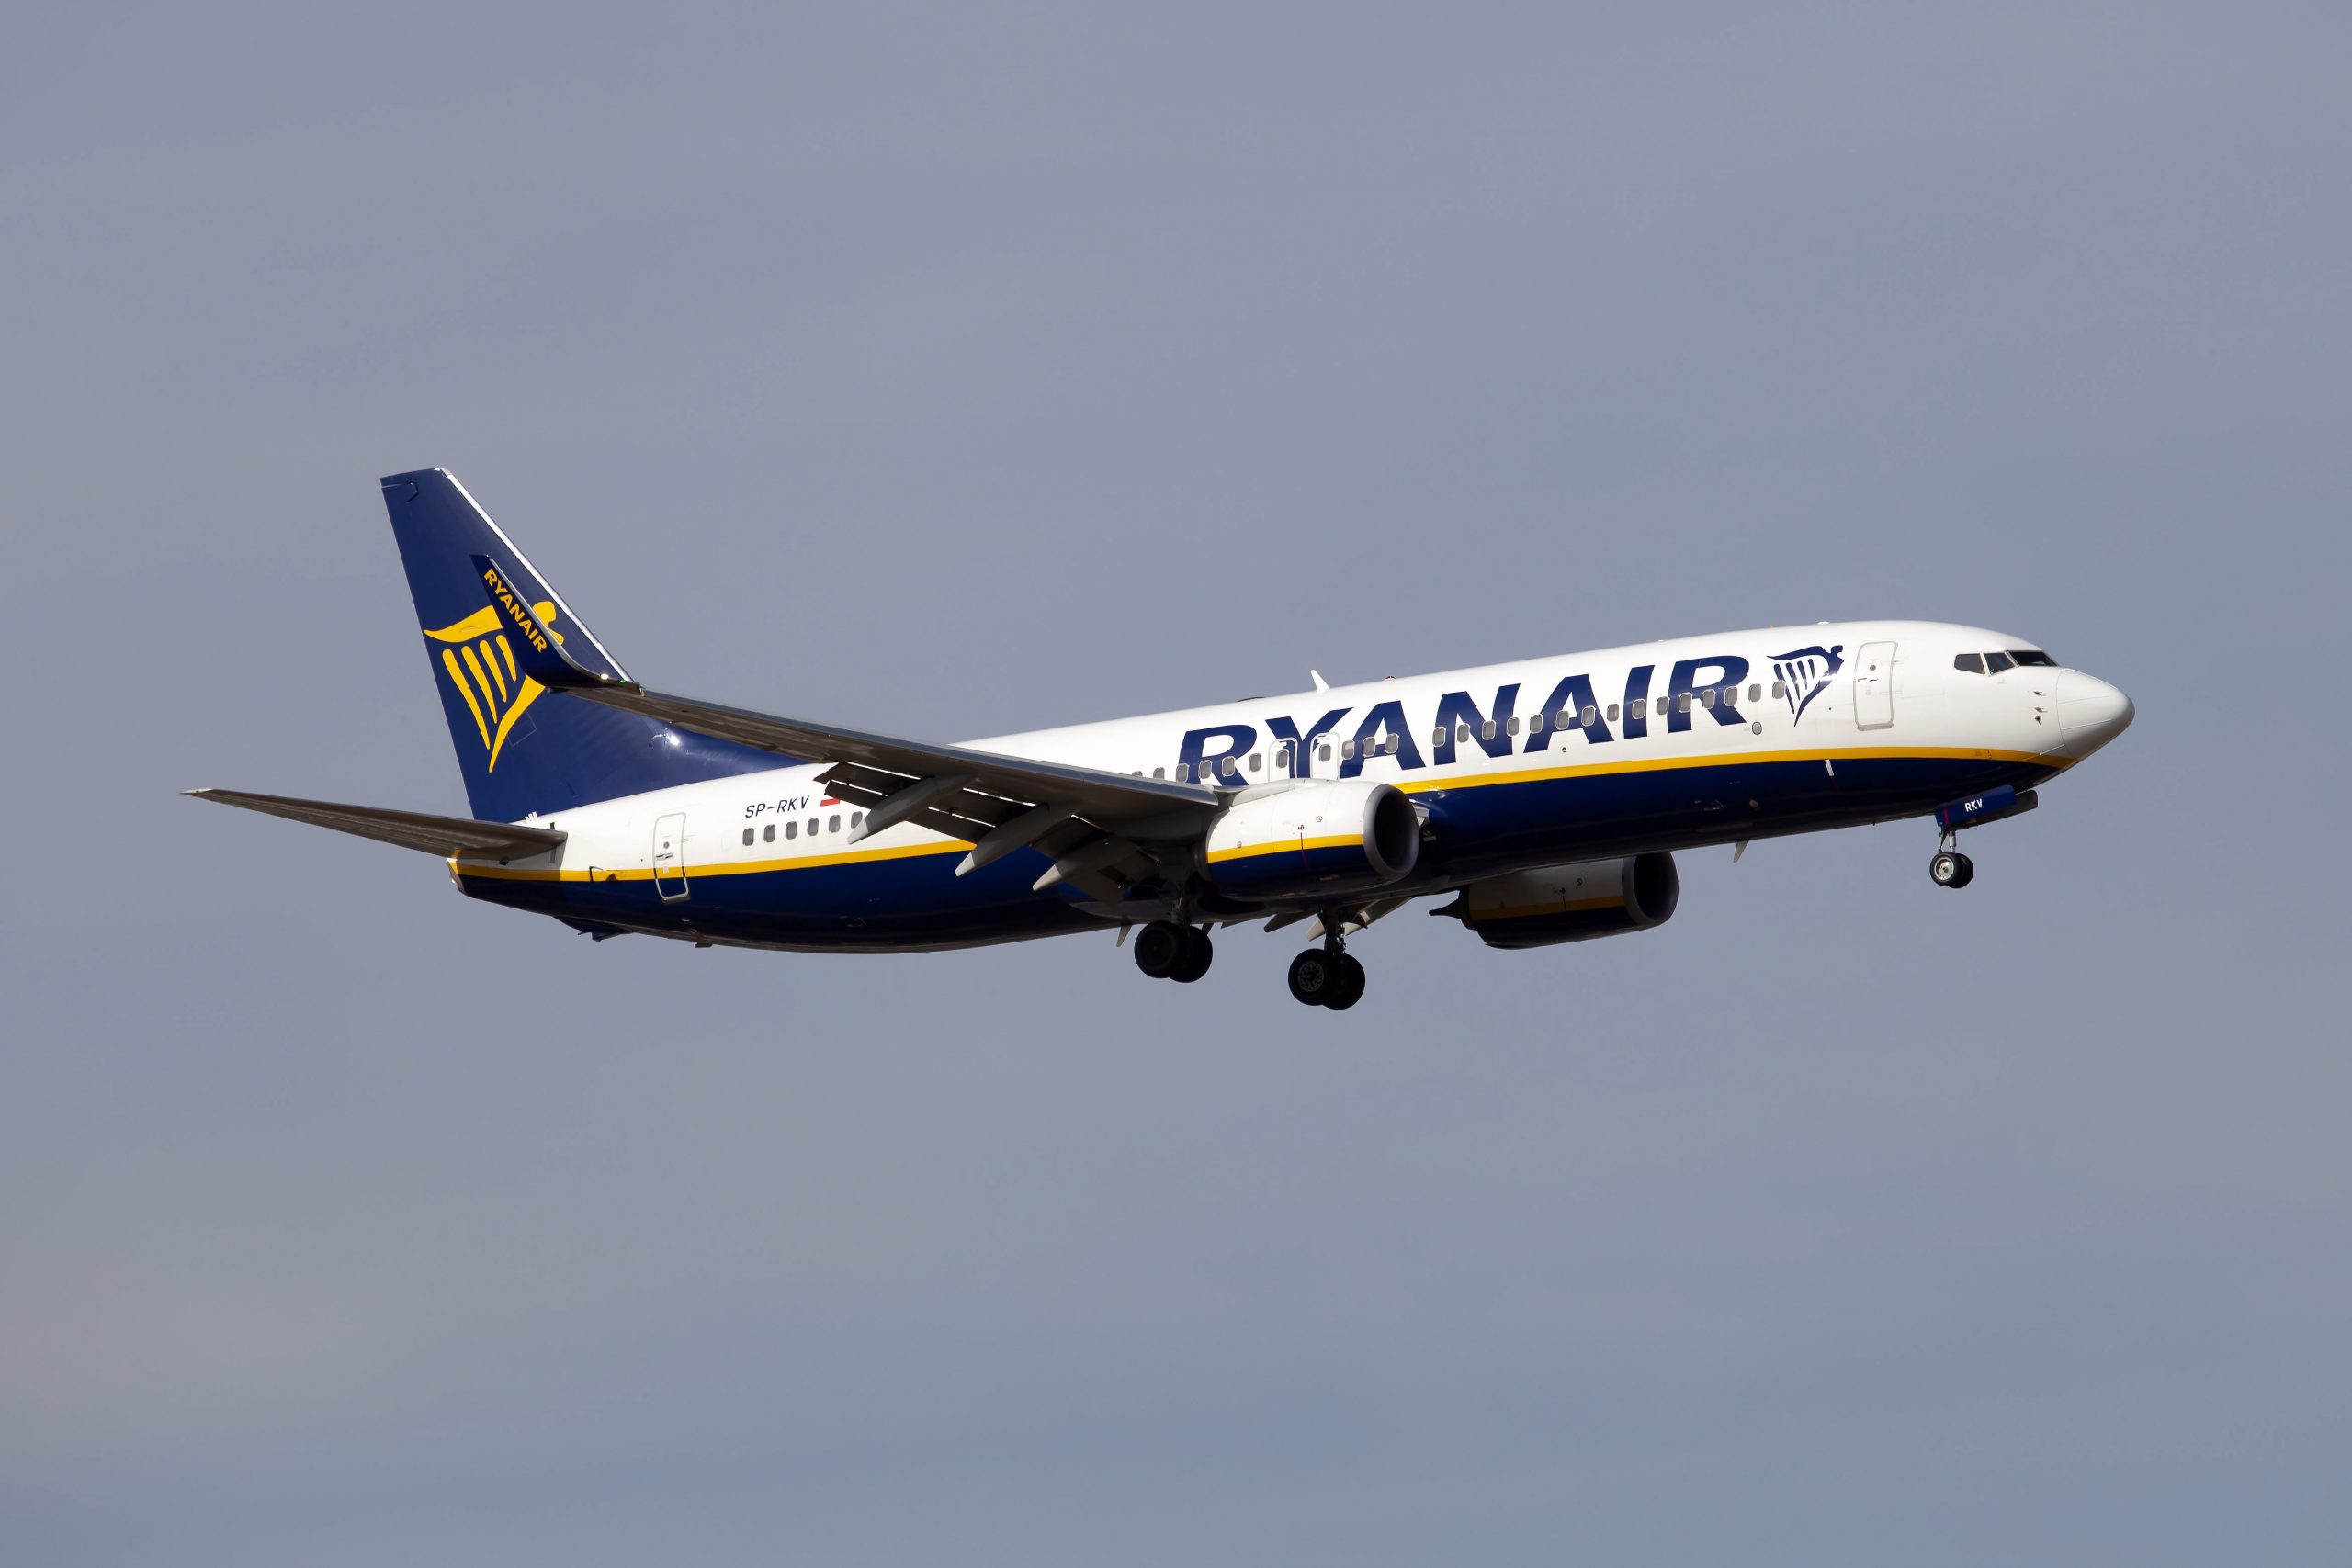 Air traffic controllers claim 30 drunk Brits fought on board Ryanair flight to Spain's Costa Blanca